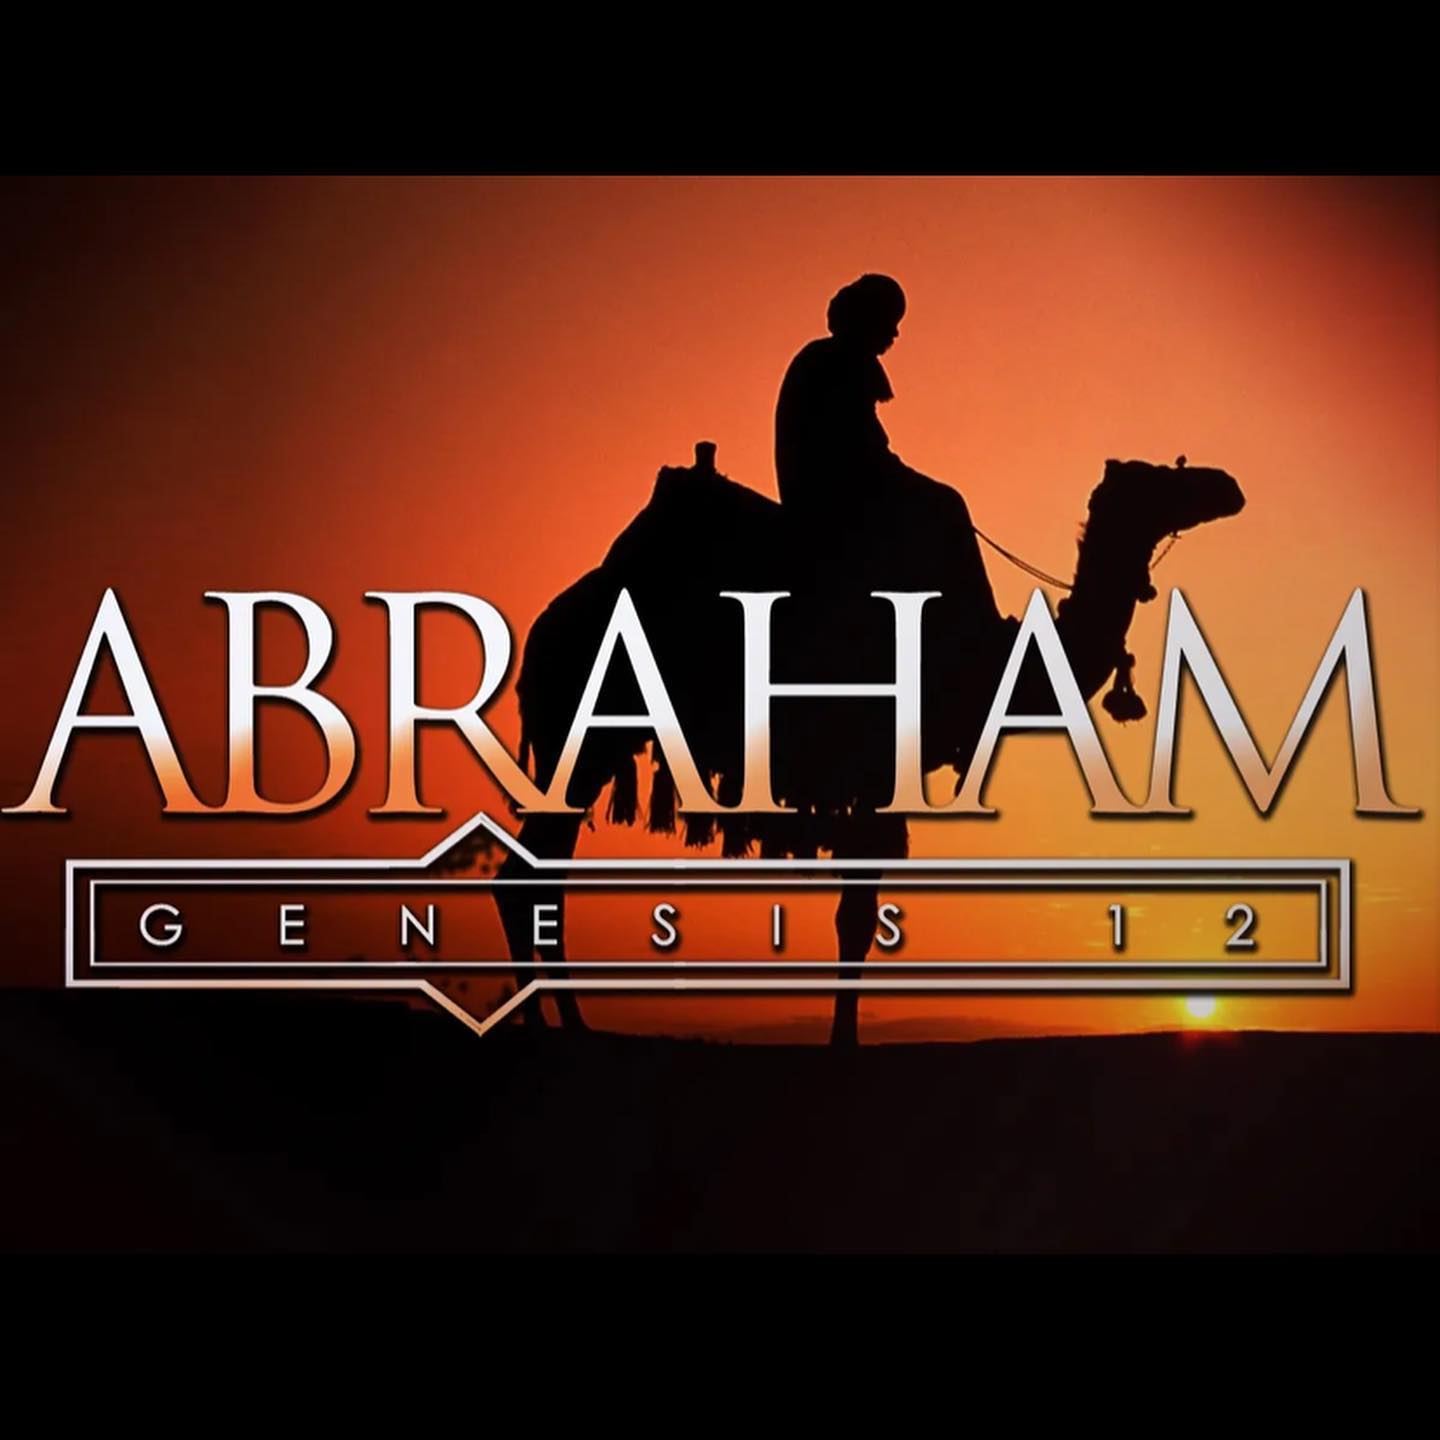 Genesis 1-11 is about great events, and the rest of Genesis is about great people. Starting with Abraham. Abraham is central in both Old and New Testaments, known for his great faith. Did you also know Abraham lied to protect himself? A refreshing truth about the Bible: it never flatters its heroes; it gives realistic pictures of the human condition (and why we need a Savior).Abraham (first Abram) began as a idol worshiper with family drama. Yet six times, God said to him, “I will”. God’s promises inspired Abram to step out in faith!Join us Sunday, 10AM @fallbrookvineyardchurch as our dear friend, Doug Gibbs, aka “Mr. Constitution” will be teaching us from Genesis 12. @douglasvgibbsBring your friends, chairs and bibles. Stay for  lunch & fellowship after! @oishi_sushi_fusion @thevineyard1924 #abraham#promisesofgod#fatherofnations#allscriptureisrelevant#jesus#wordofgod#jesus#thewaythetruththelife#worship#prayer #repentance#revival#lifeabundant#community #support #love#familyofgod #outdoorchurch #organicchurch #outlawchurch #dogfriendlychurch#thevineyard1924